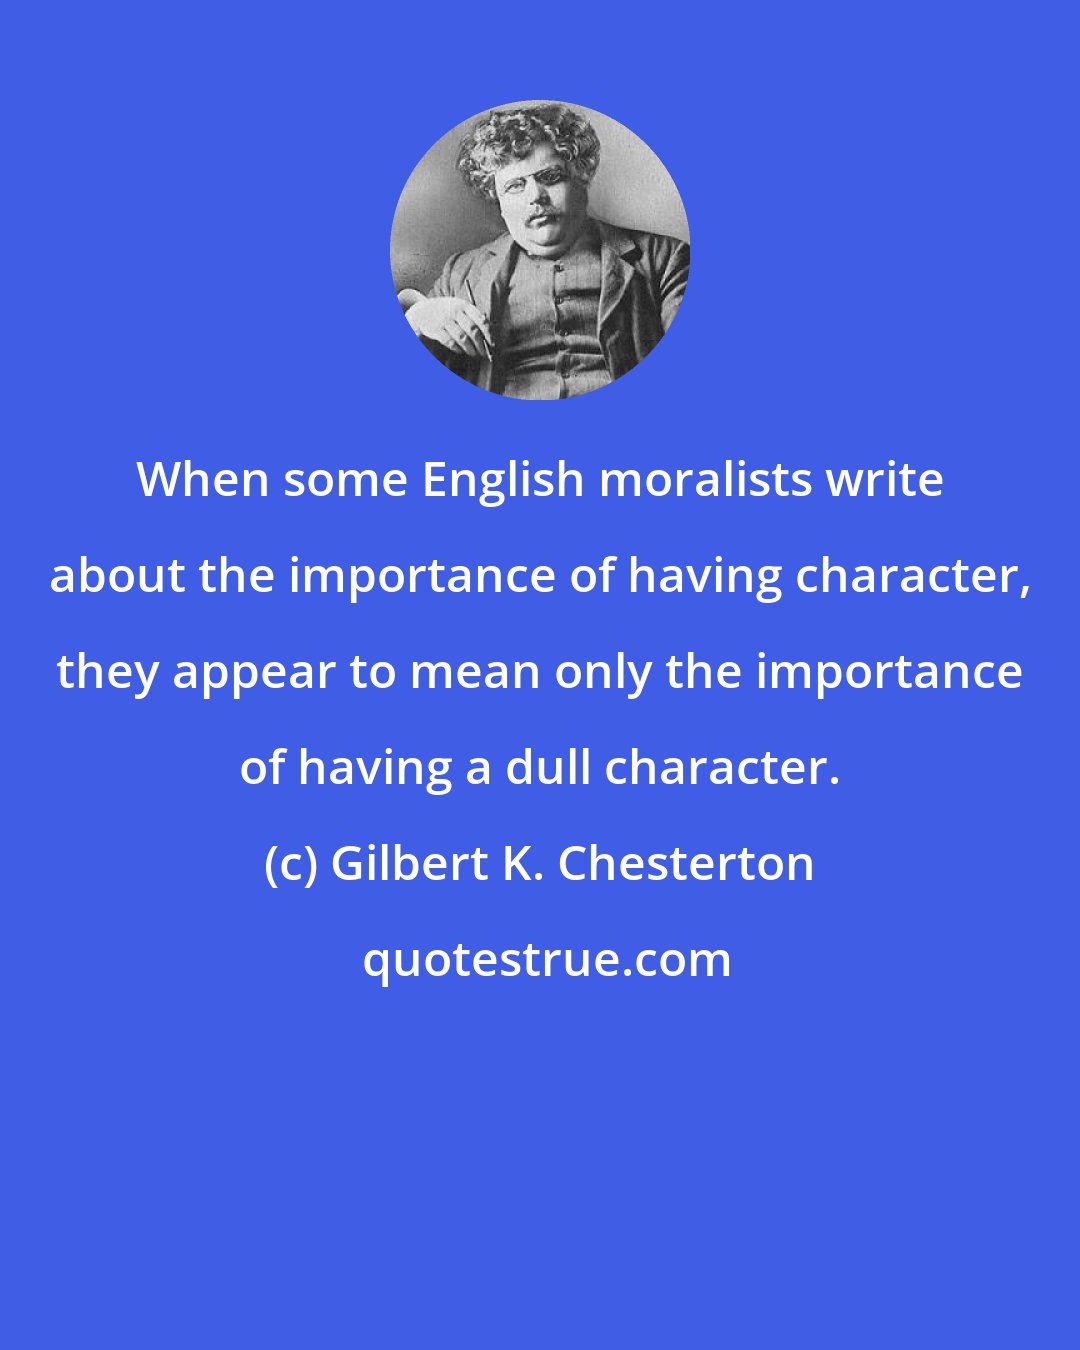 Gilbert K. Chesterton: When some English moralists write about the importance of having character, they appear to mean only the importance of having a dull character.